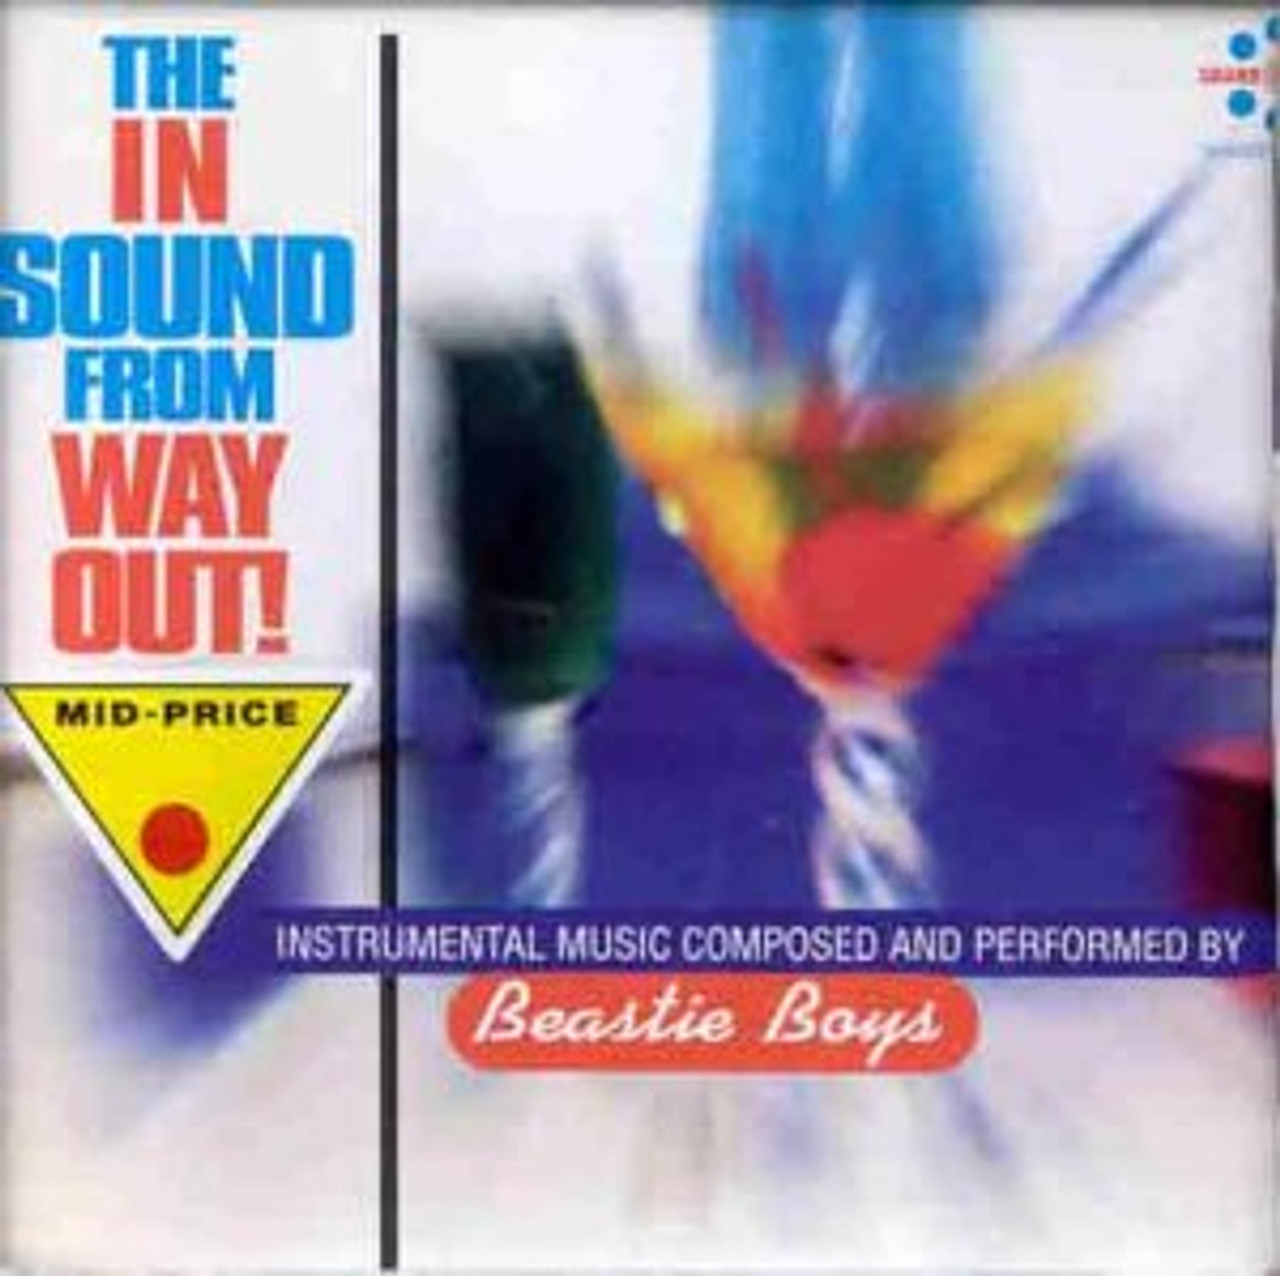 BEASTIE BOYS The In Sound From Way Out - New French Import Vinyl